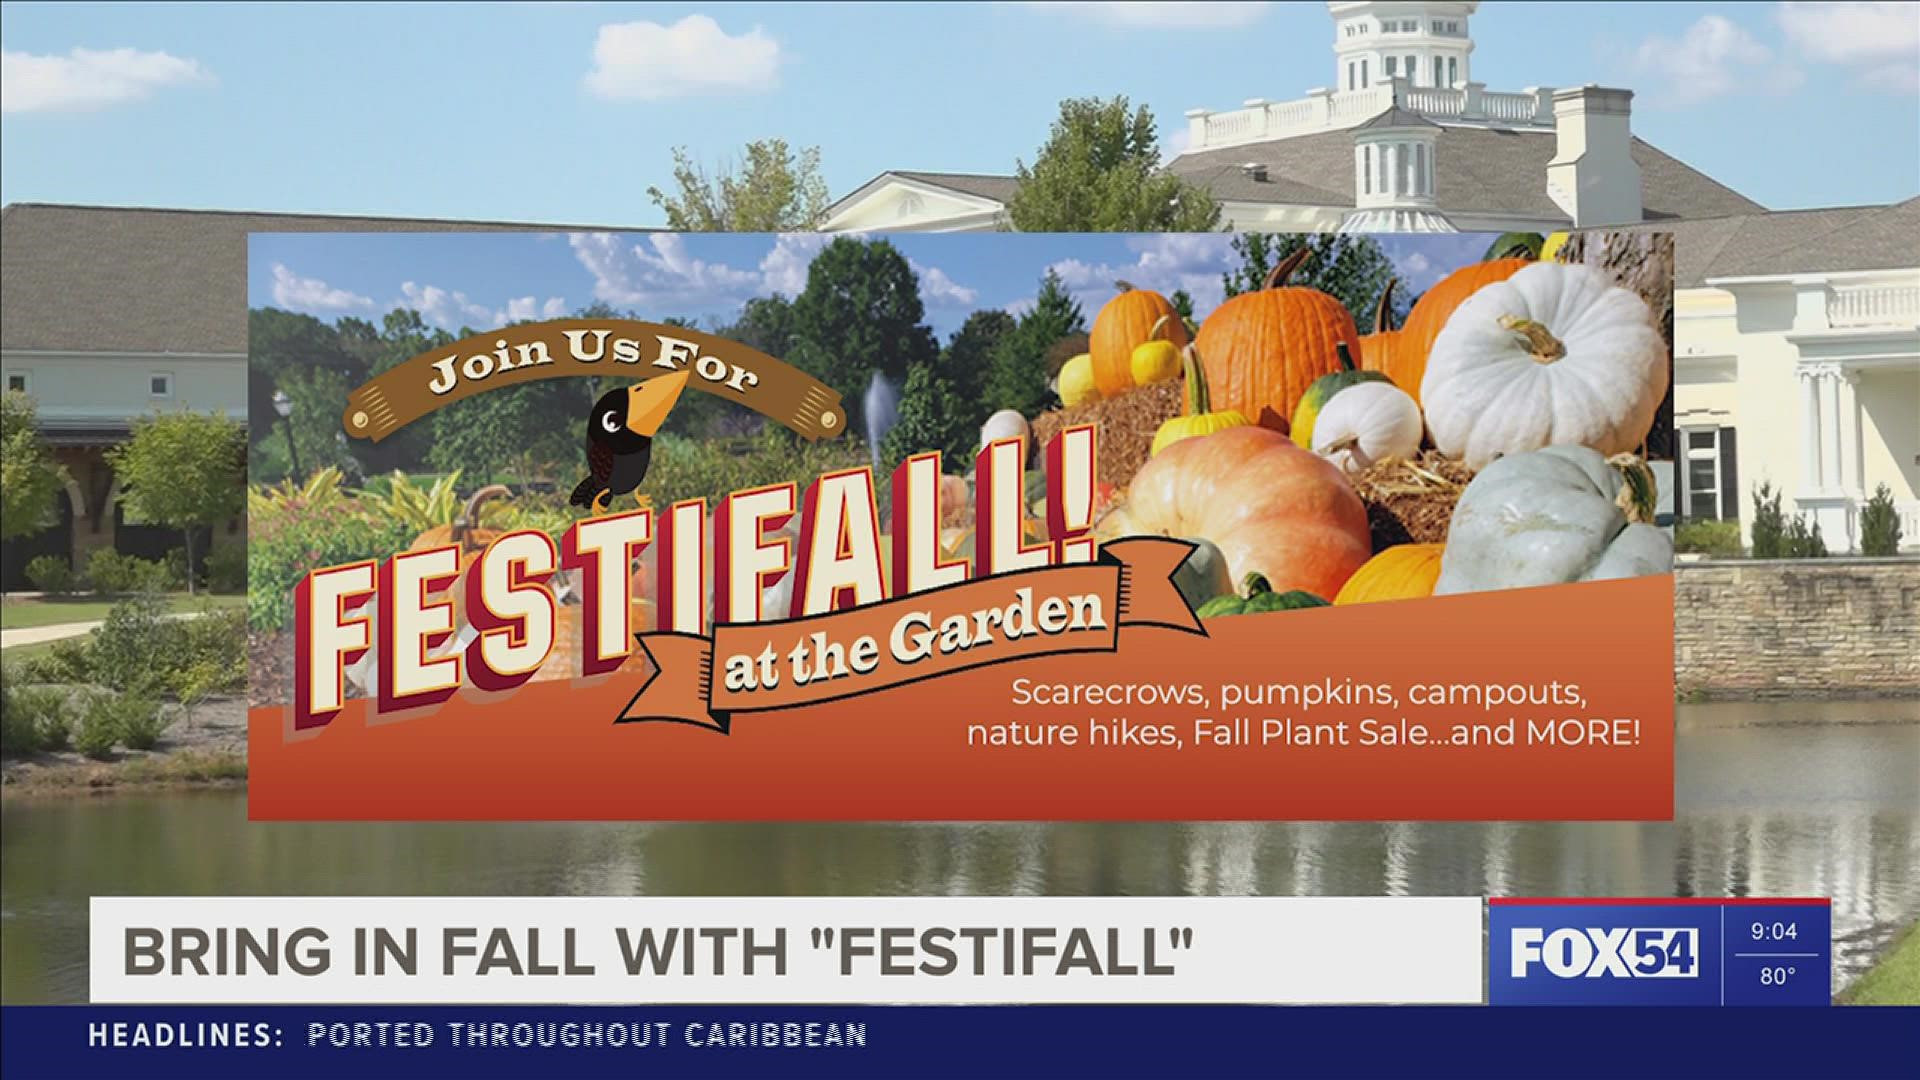 the huntsville botanical garden is kicking off the fall season with "festifall". Its' the garden's annual celebration of the changing seasons.